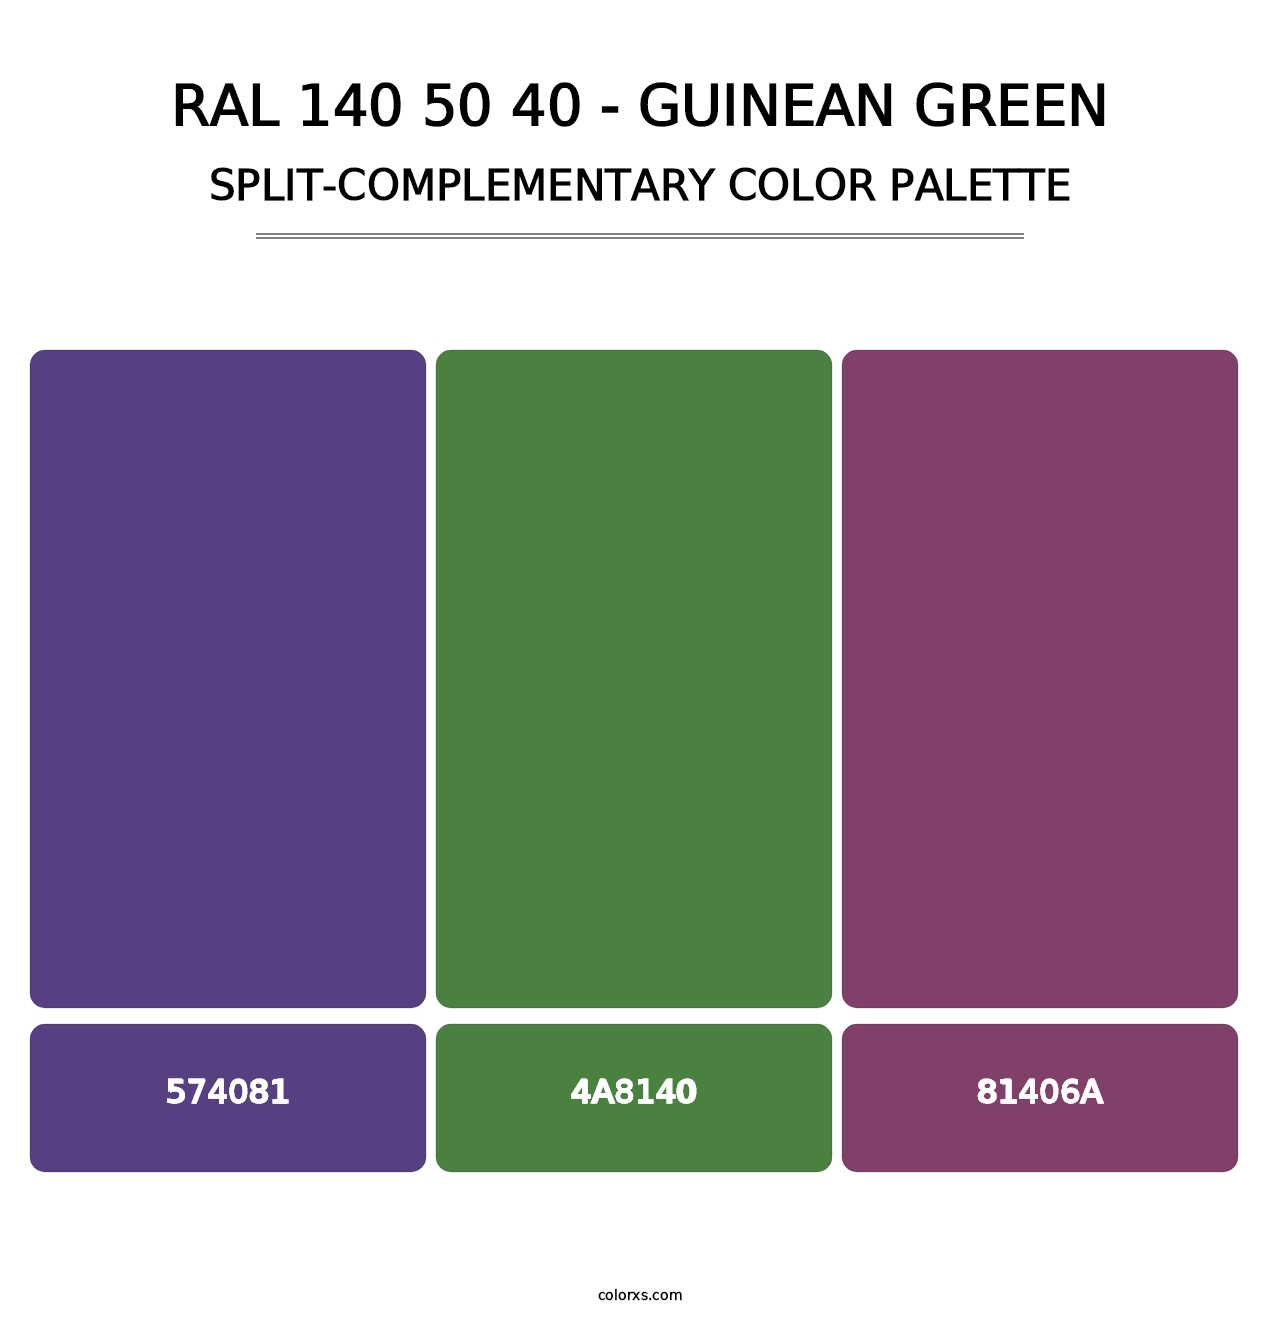 RAL 140 50 40 - Guinean Green - Split-Complementary Color Palette